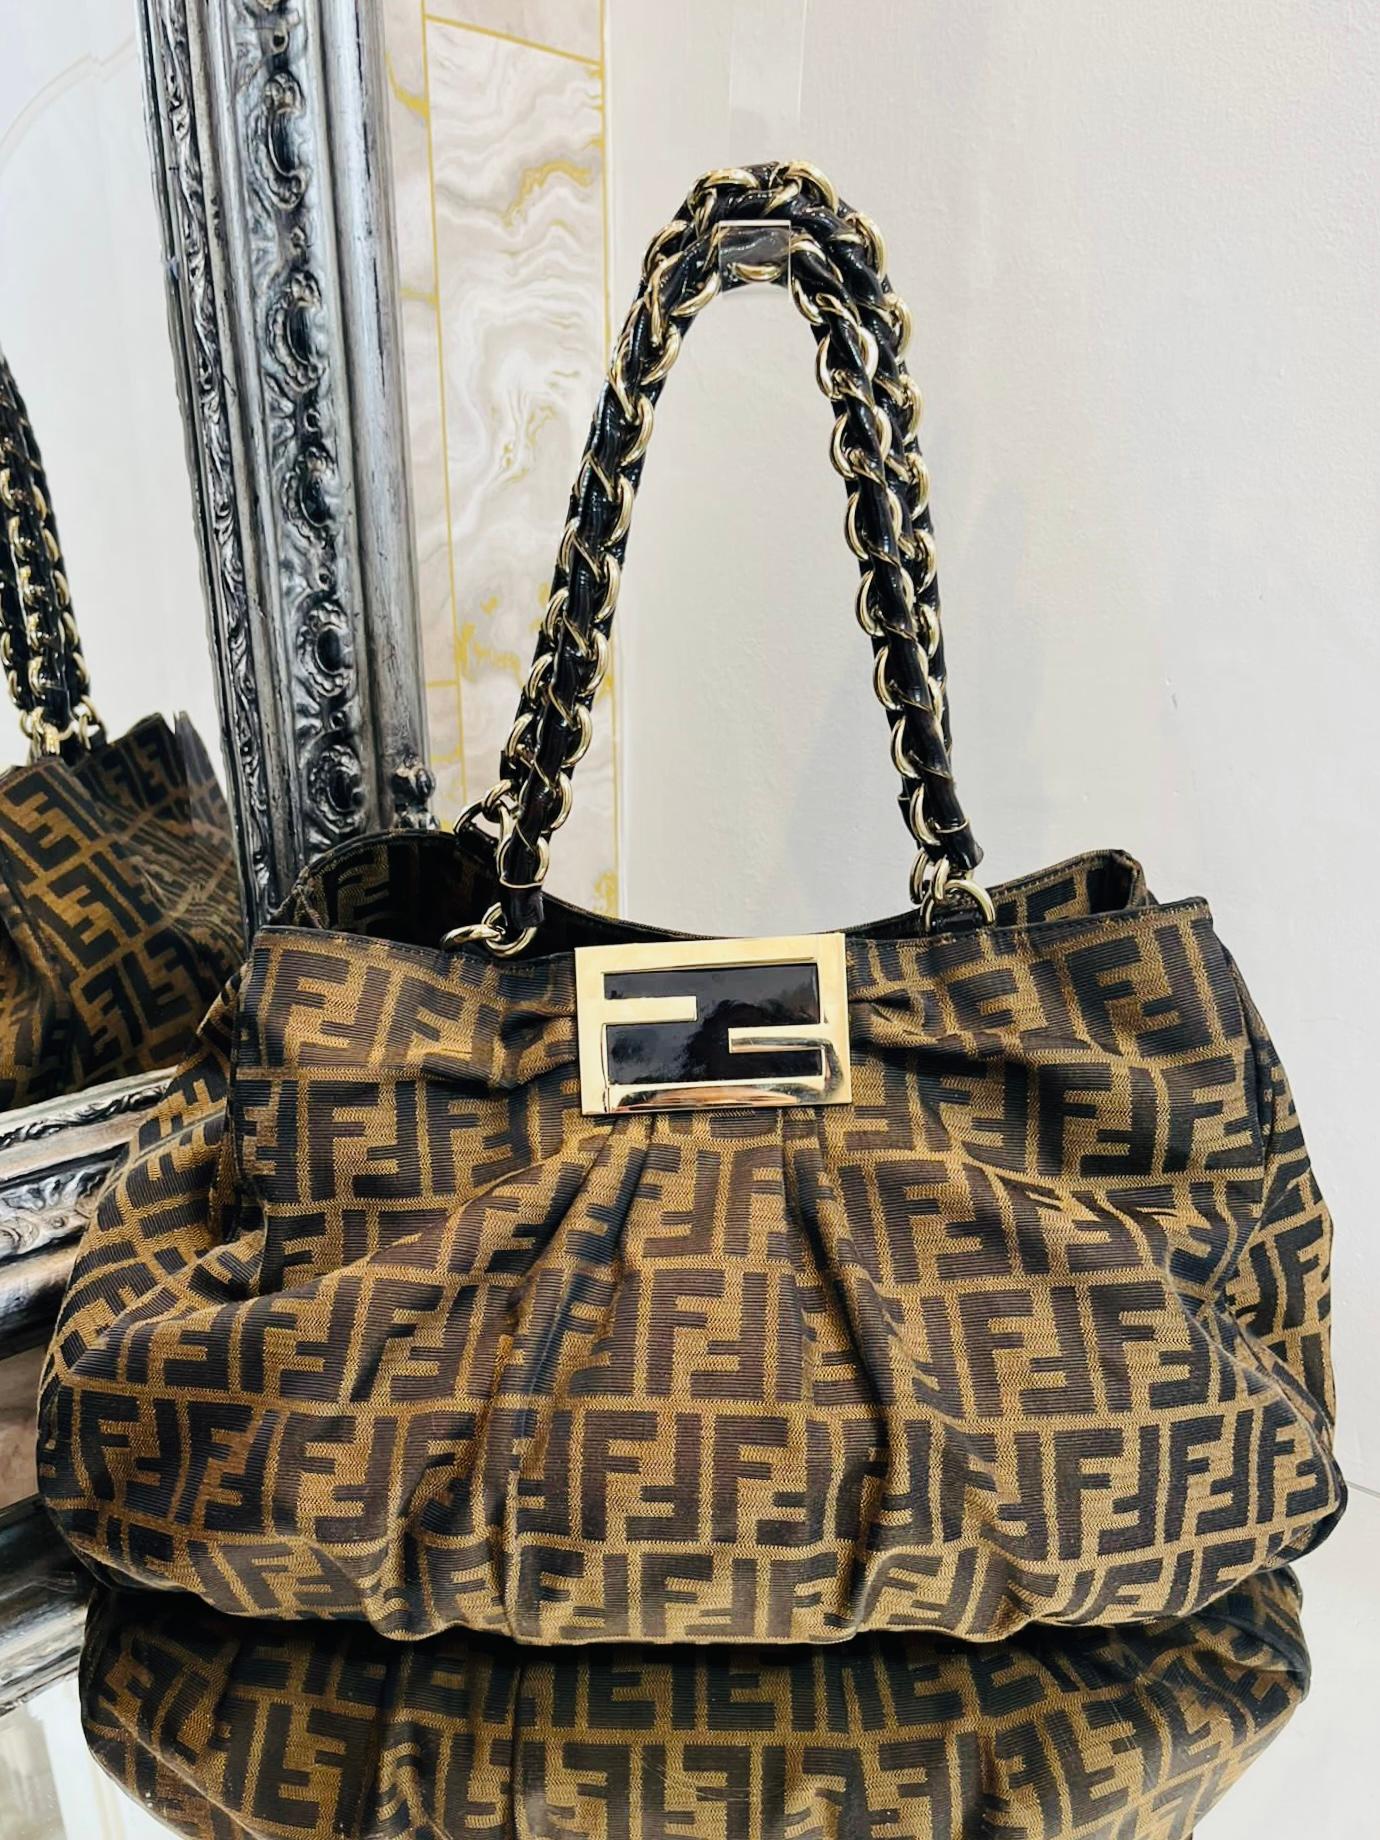 Fendi Zucca 'FF' Monogram Canvas Mia Agenello Bag

Logo printed soft body canvas bag with brown patent leather trim

and large Fendi 'FF' logo, gold plate on the front.

Chain and leather shoulder straps.

Size - Height 31cm, Width 44cm, Depth